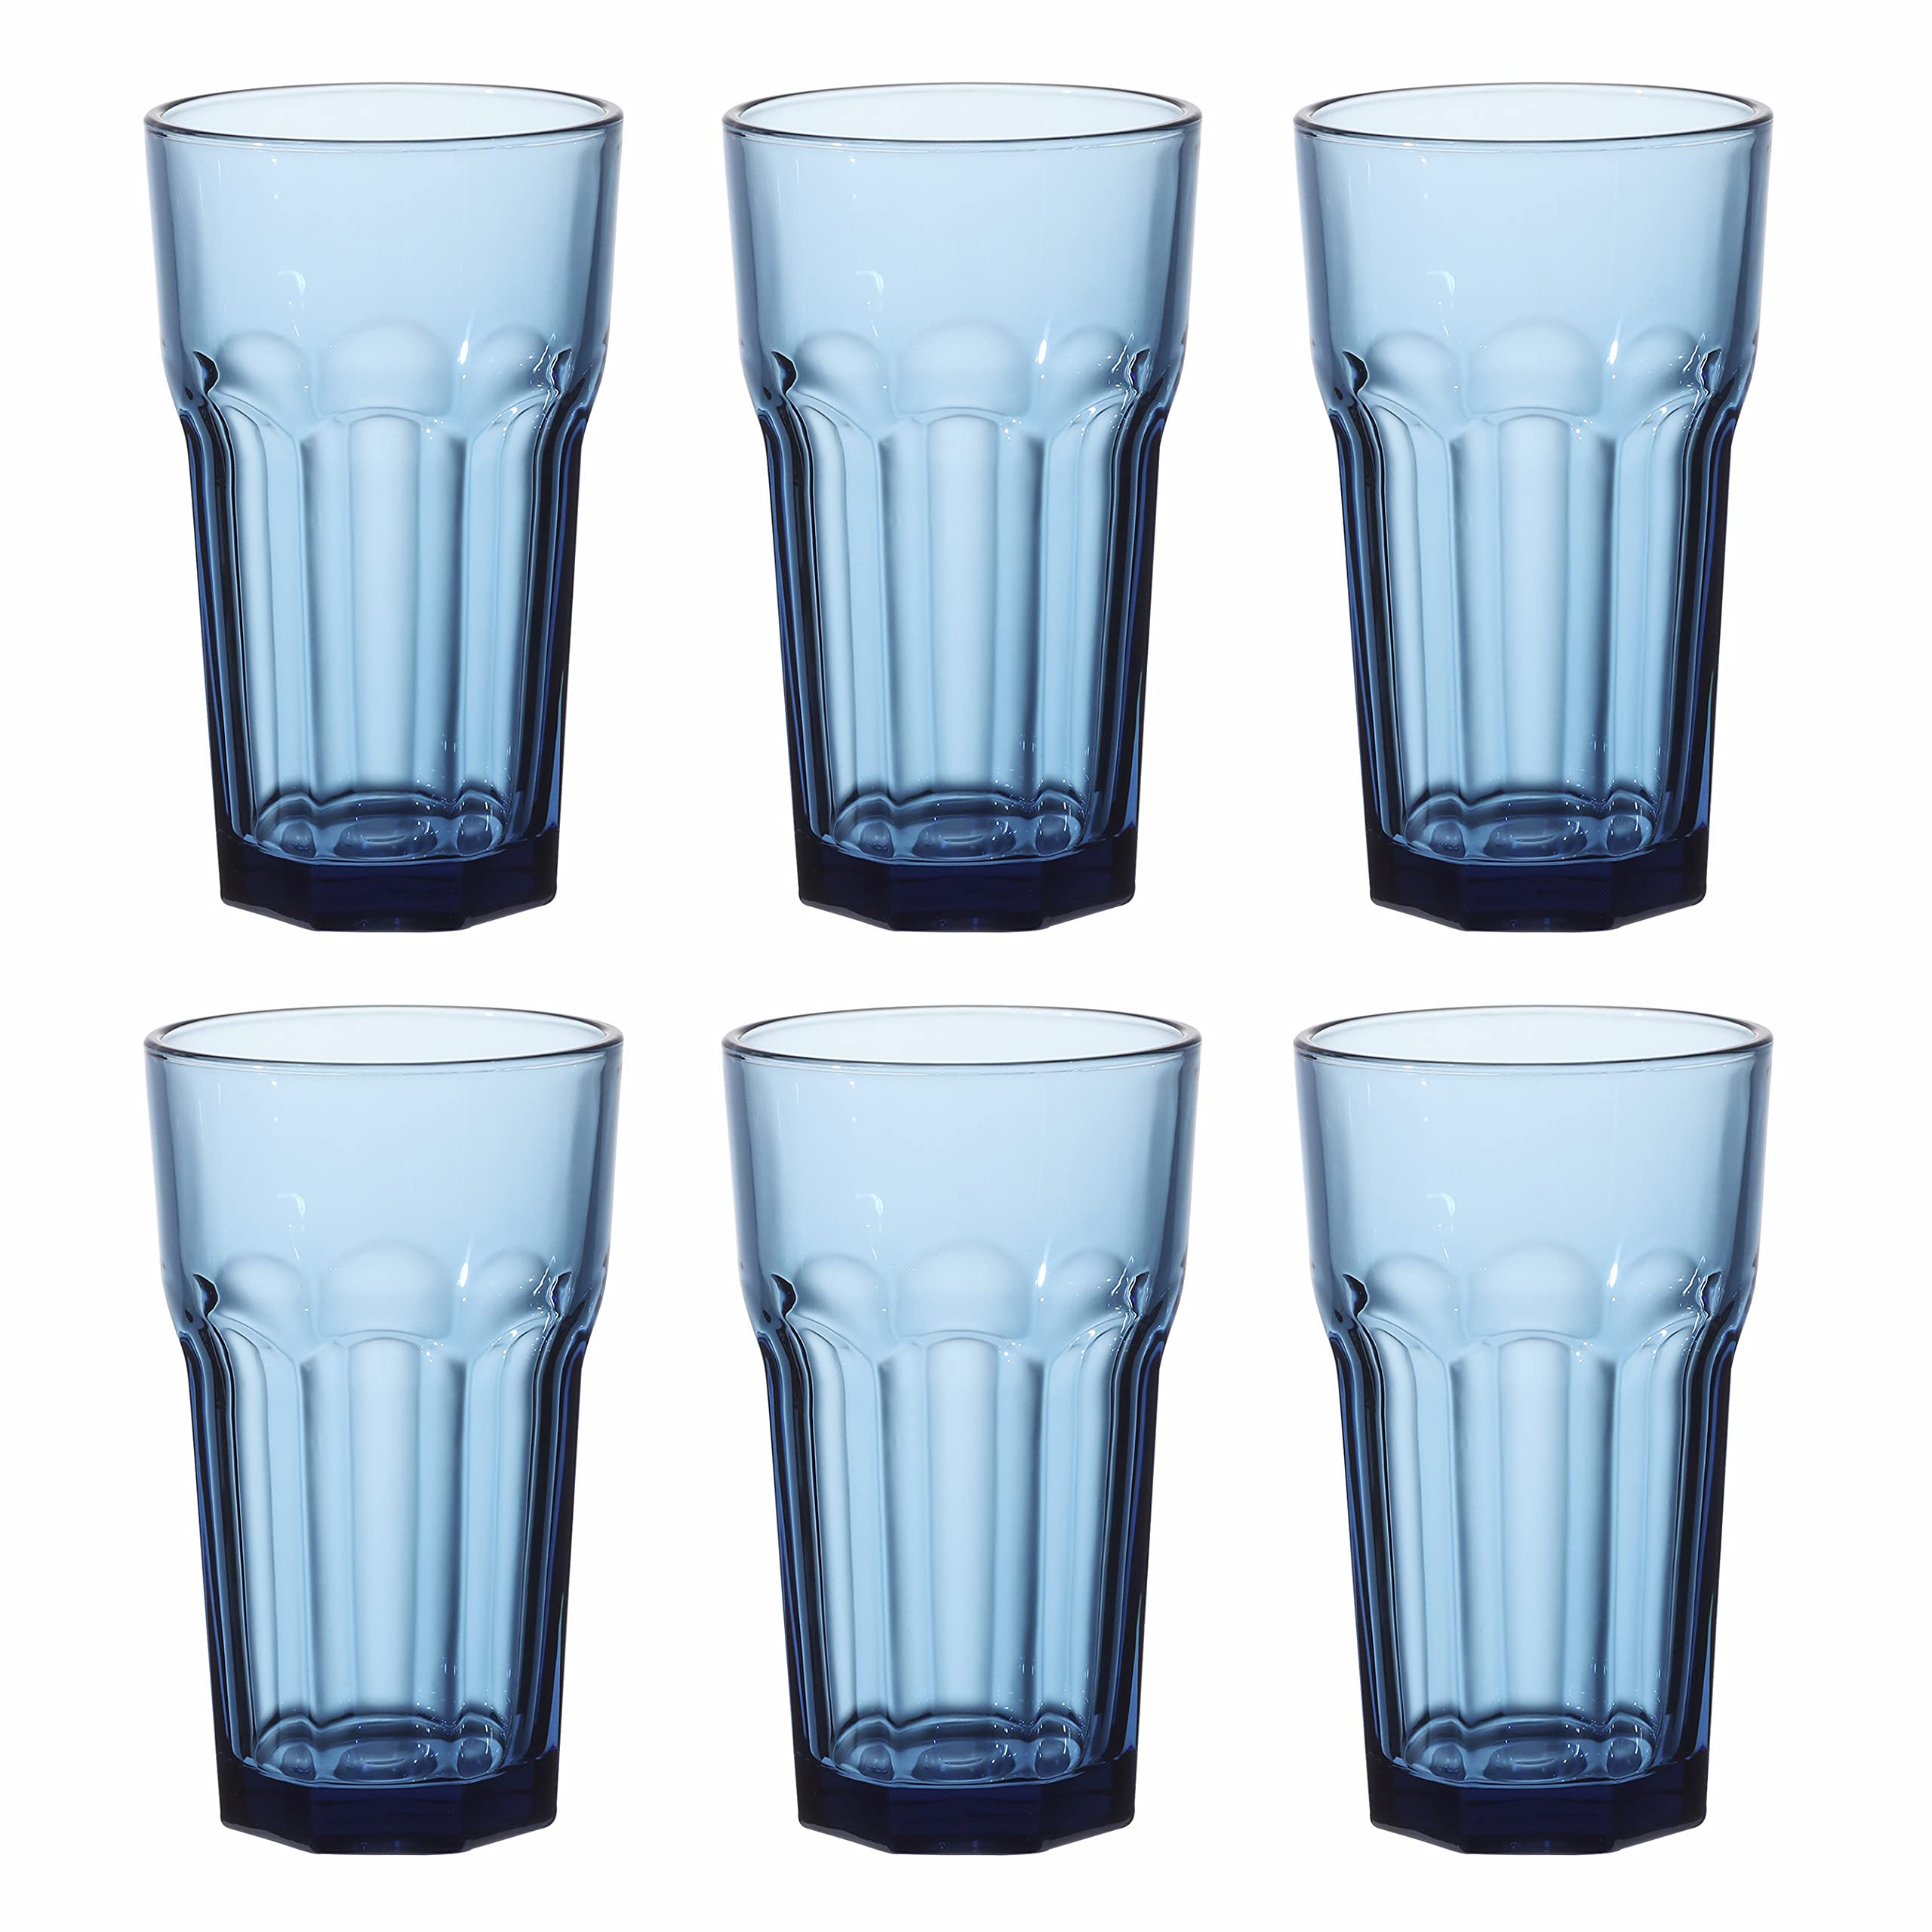 Anchor Hocking 16 Ounce Central Park Drinking Glasses  (4-piece, clear, dishwasher safe): Mixed Drinkware Sets